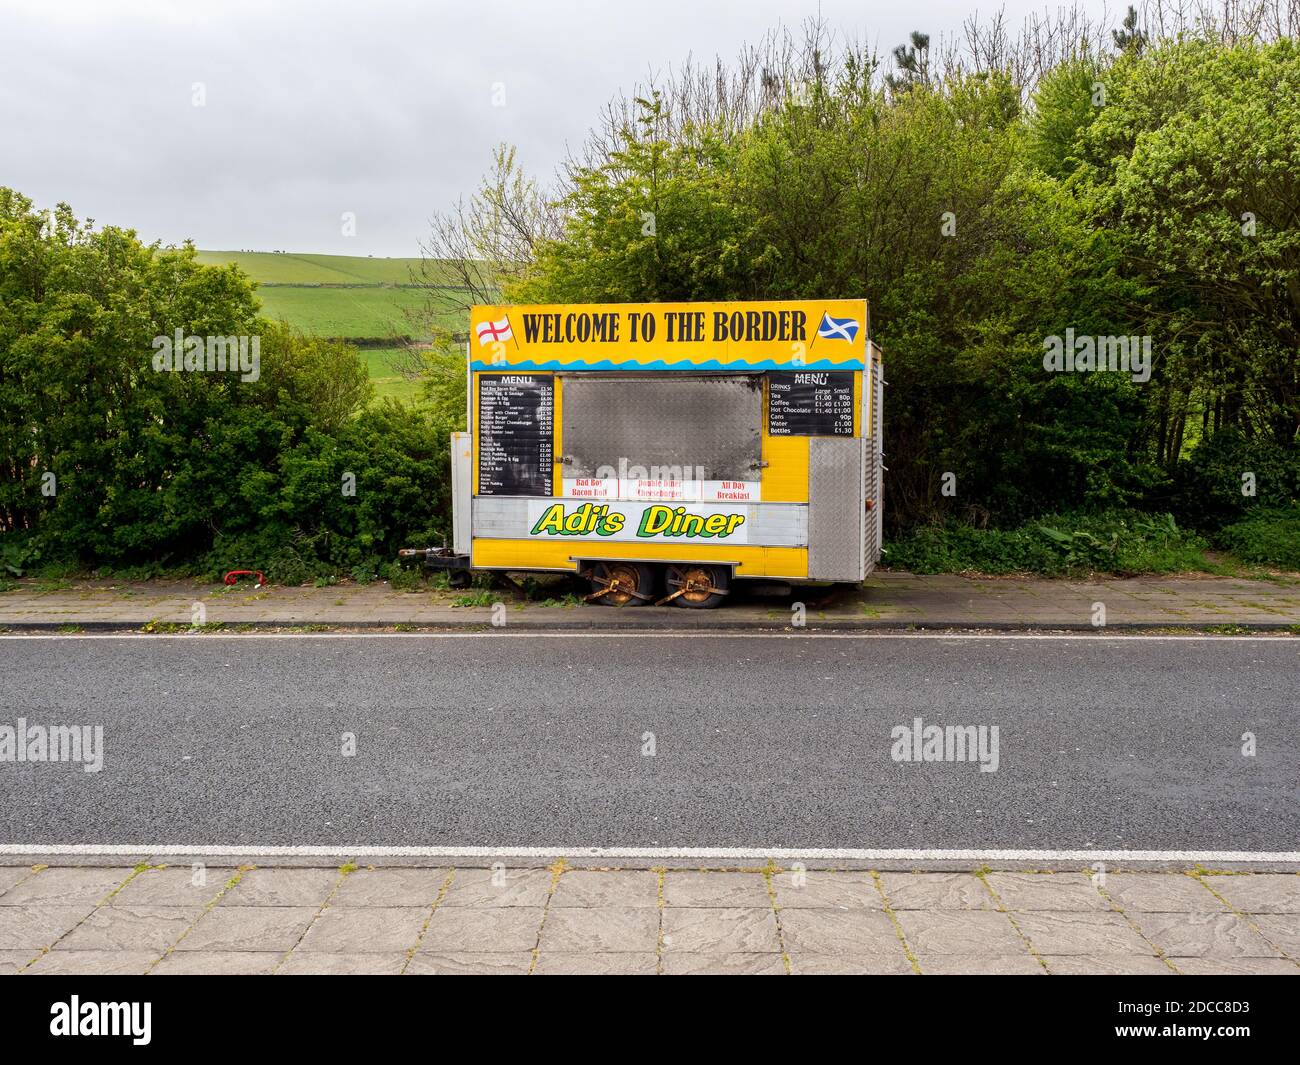 Adi's Diner situated at the border of England and Scotland. Stock Photo